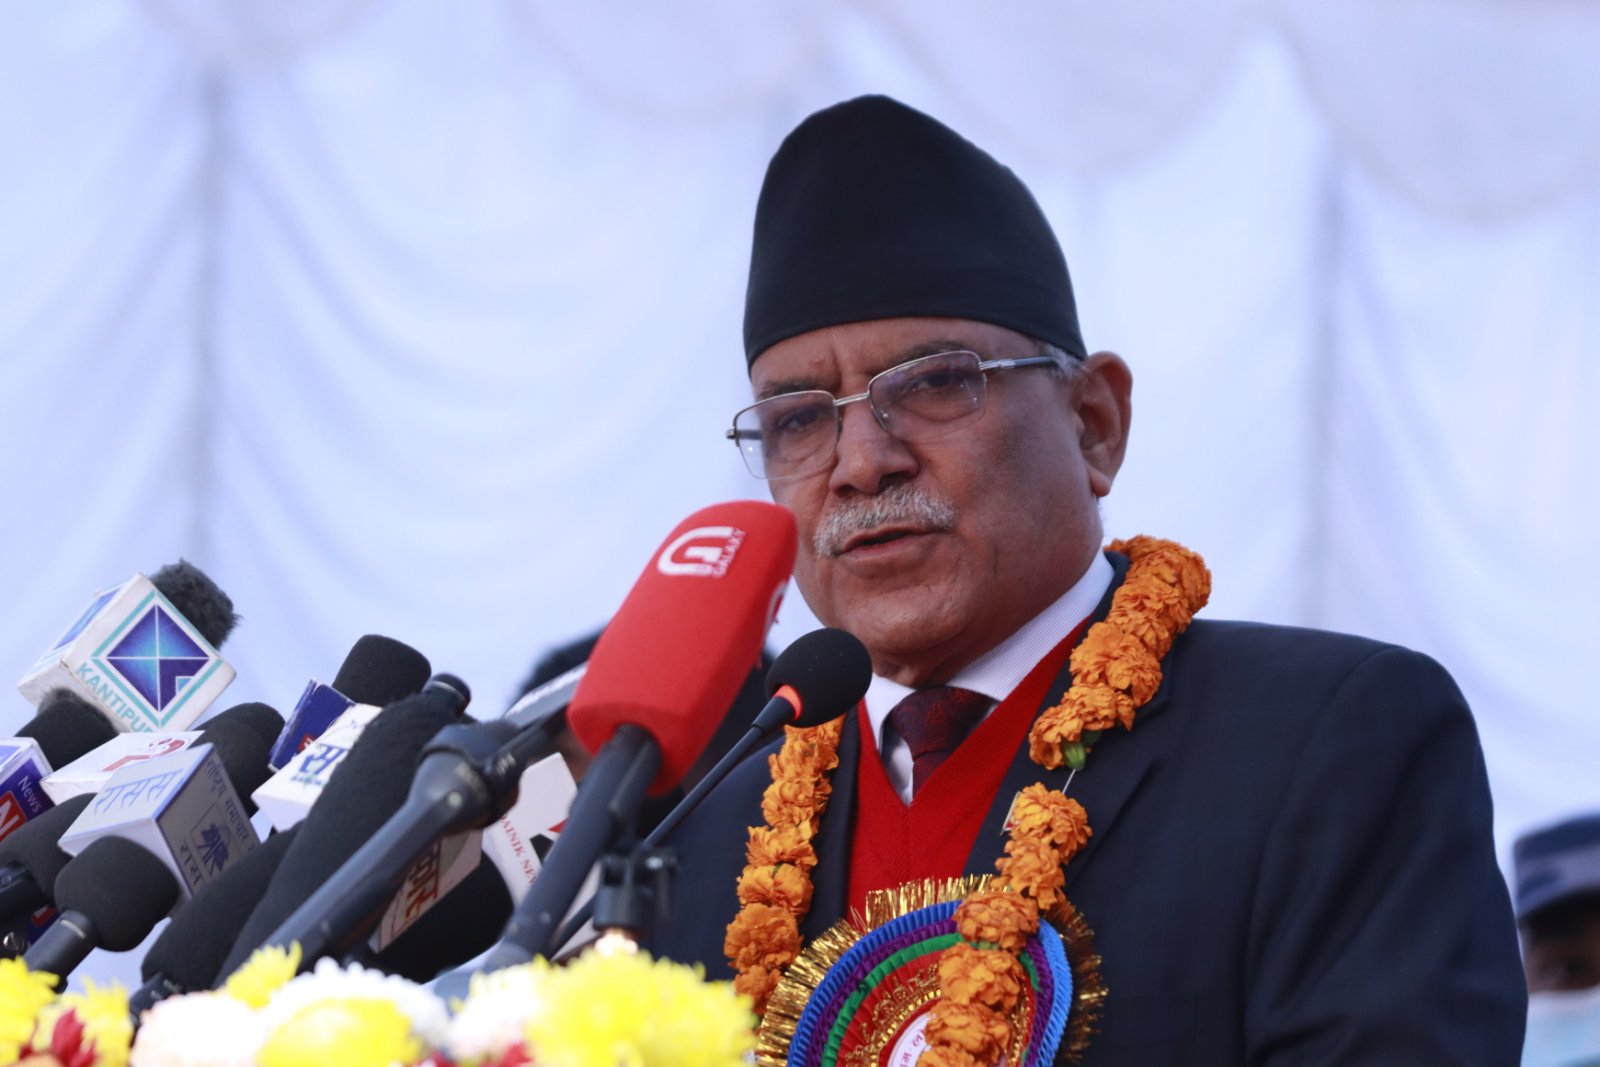 Investment promotion will be at the center of the govt agendas to achieve high growth rate: PM Dahal